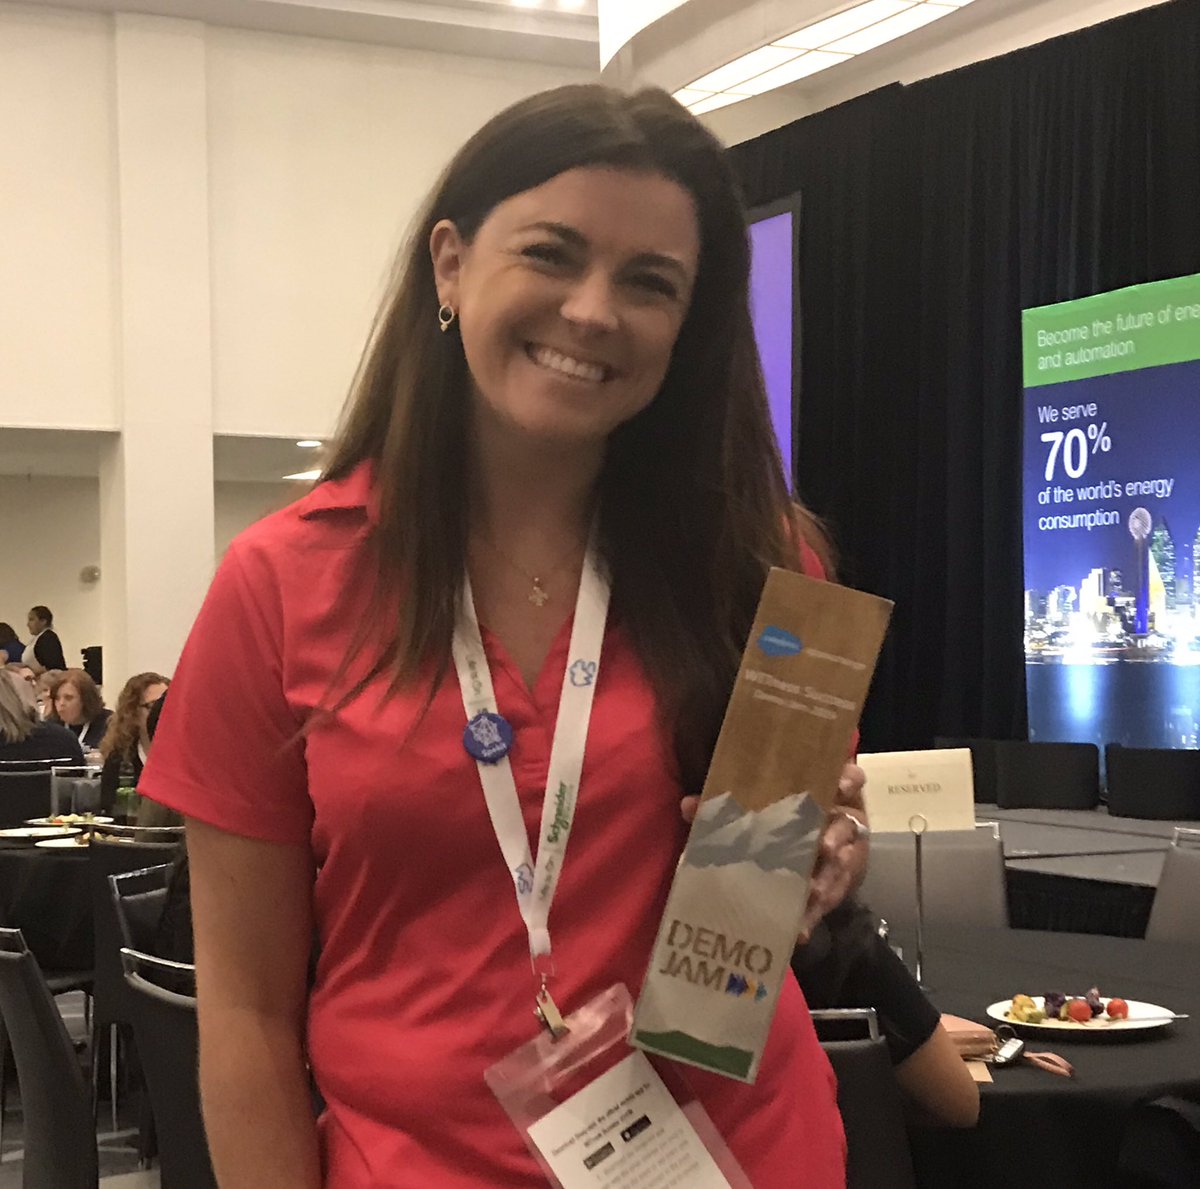 Congrats to @melfellay from @spekitapp on crushing it at the #WITconf19 demo jam! #getitgirl